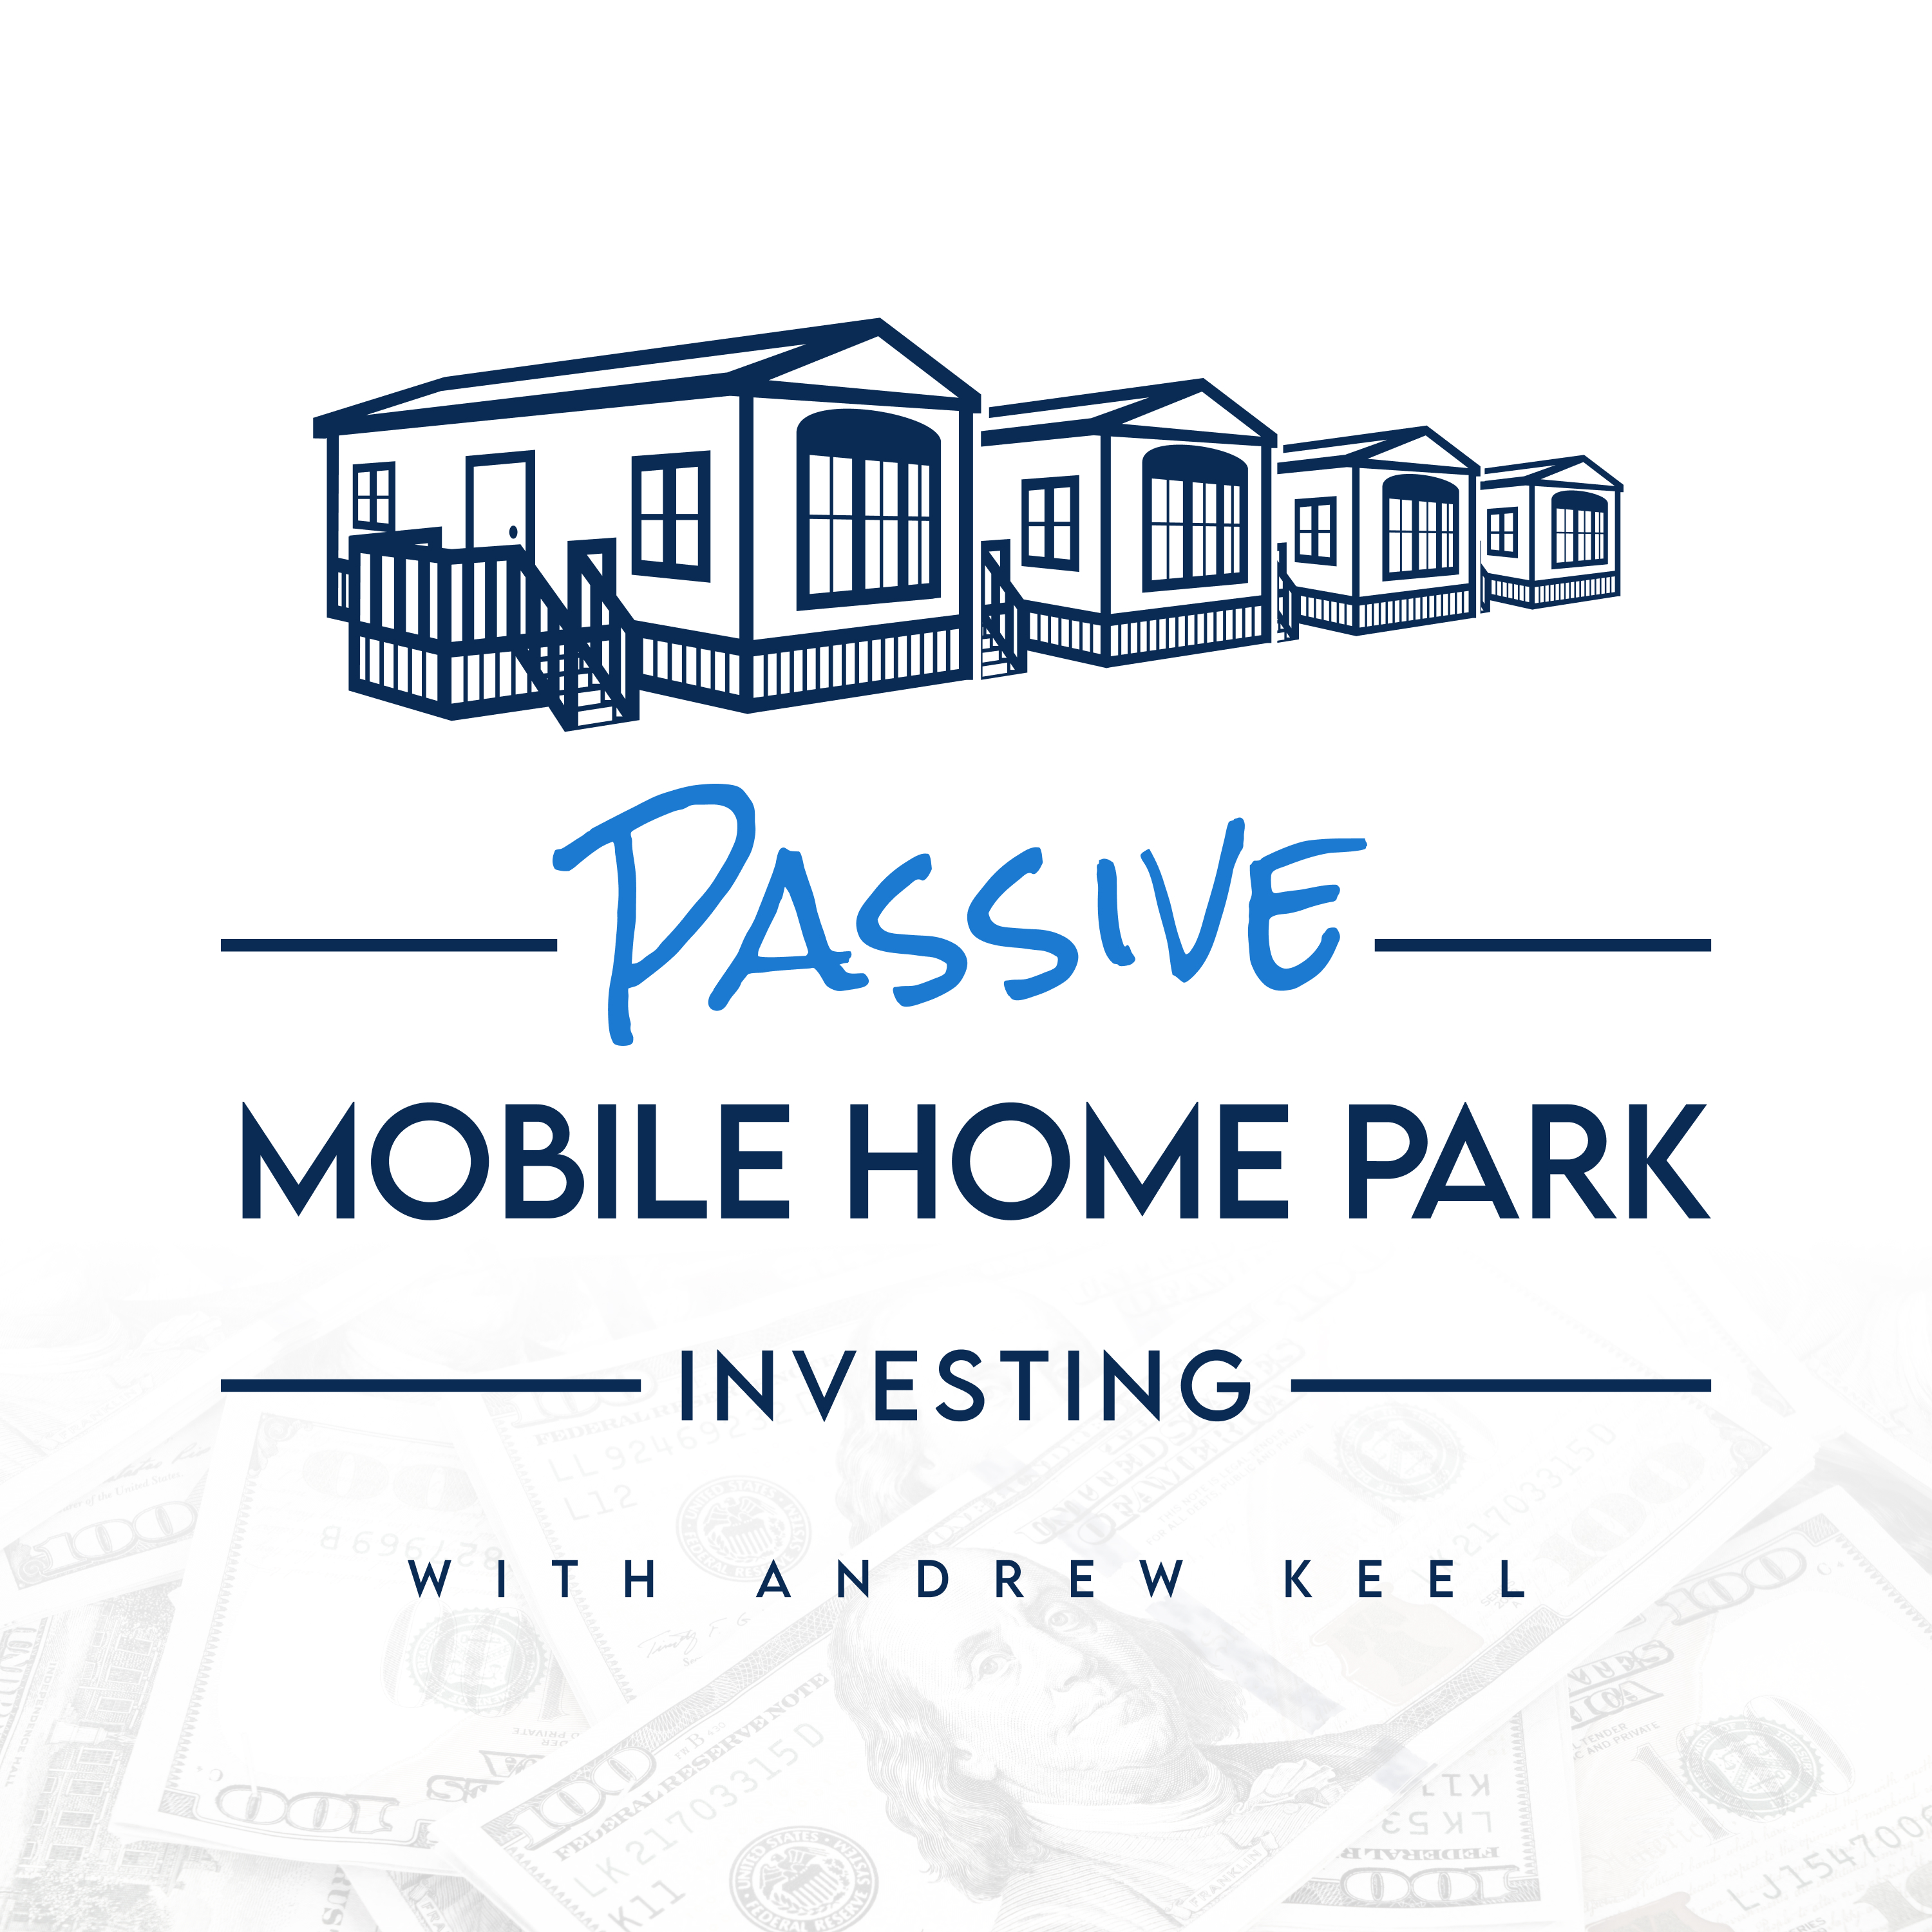 Mobile Home Parks are Very Tax Efficient